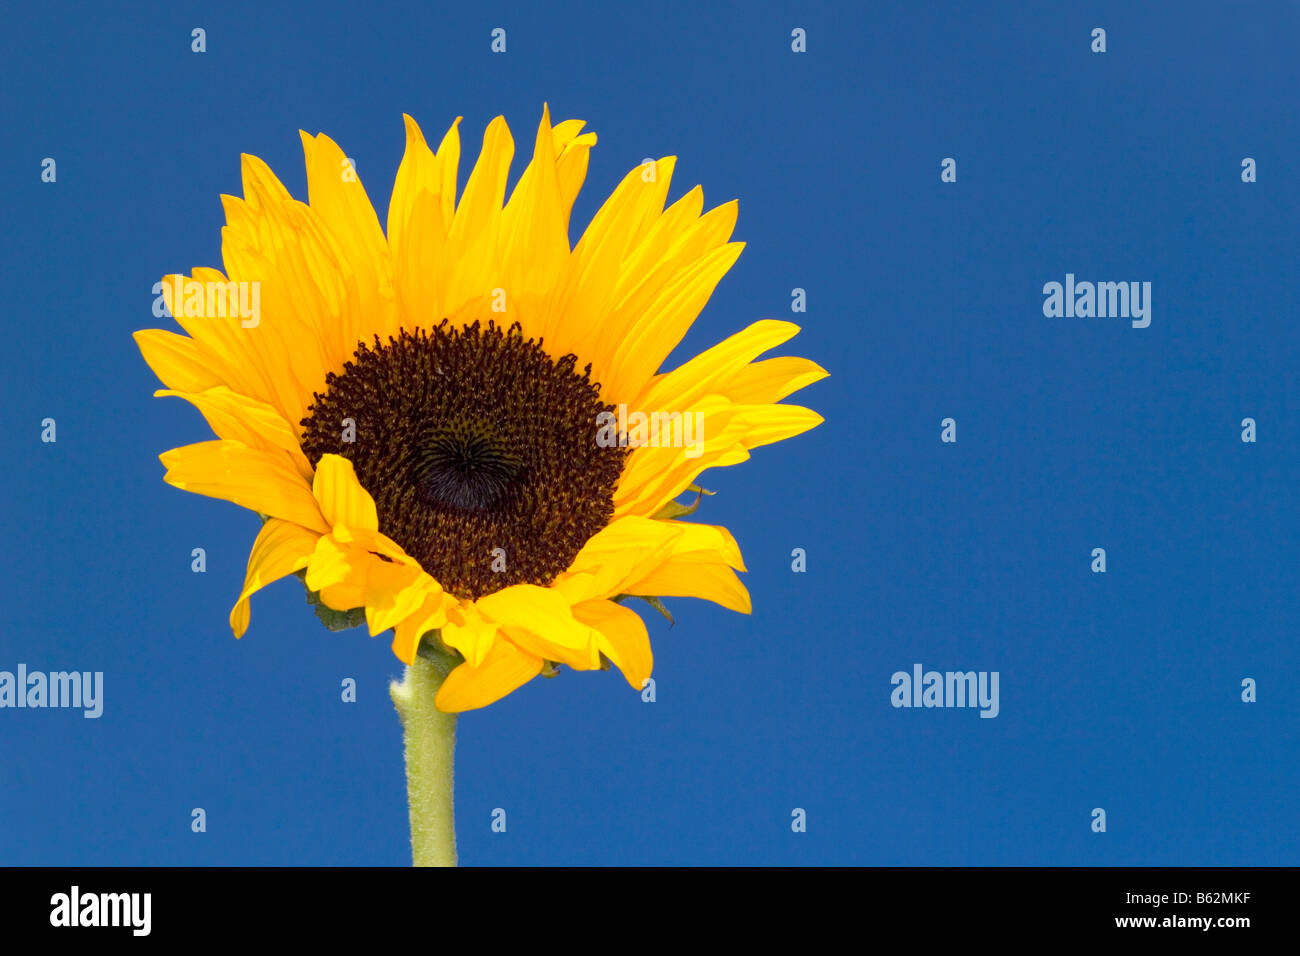 A bright yellow sunflower (helianthus annuus) head against a blue sky background. Stock Photo